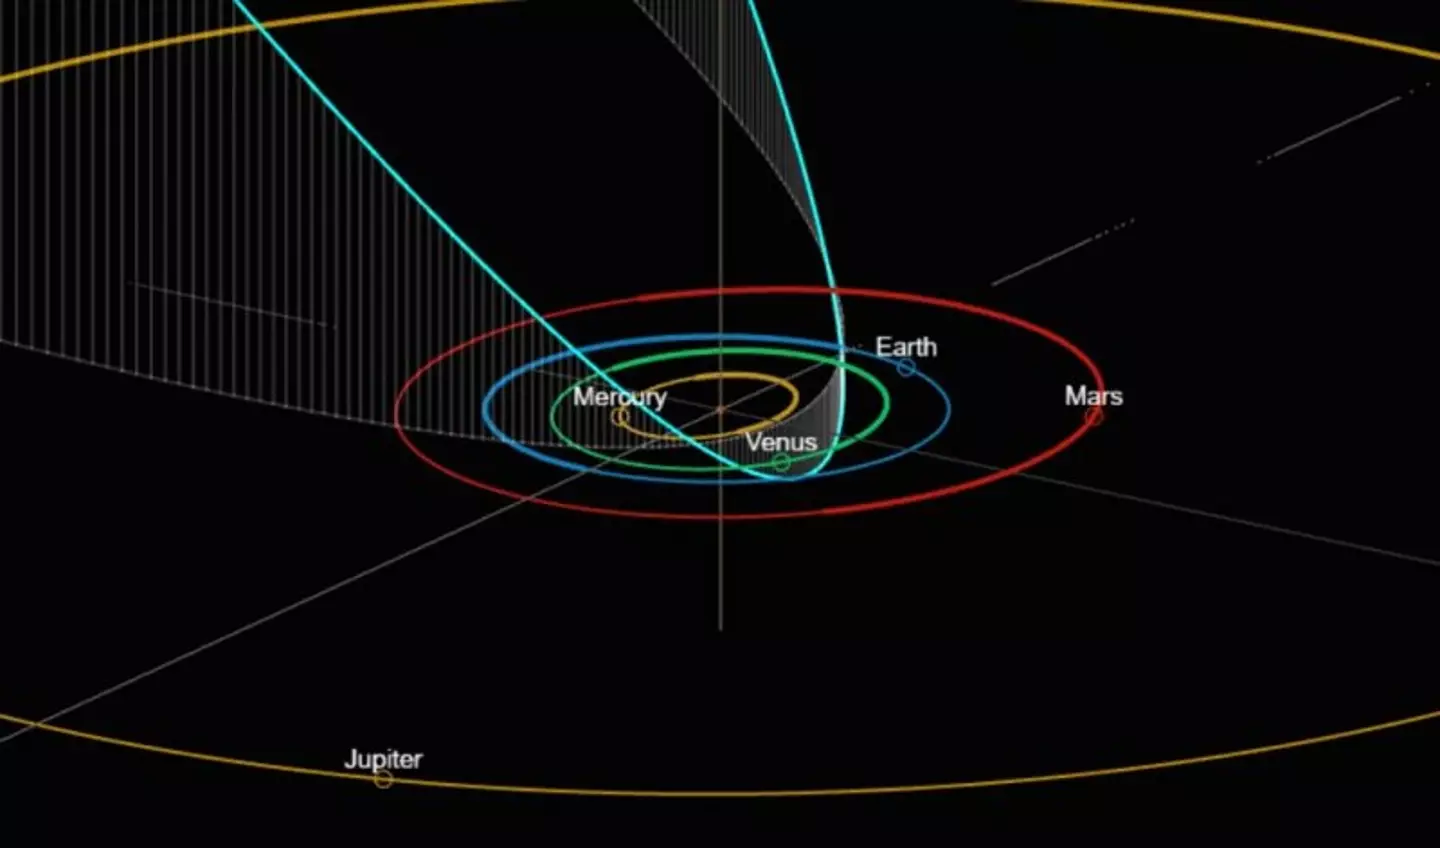 The path of Comet C/2023 A3 into the inner solar system. Wee!